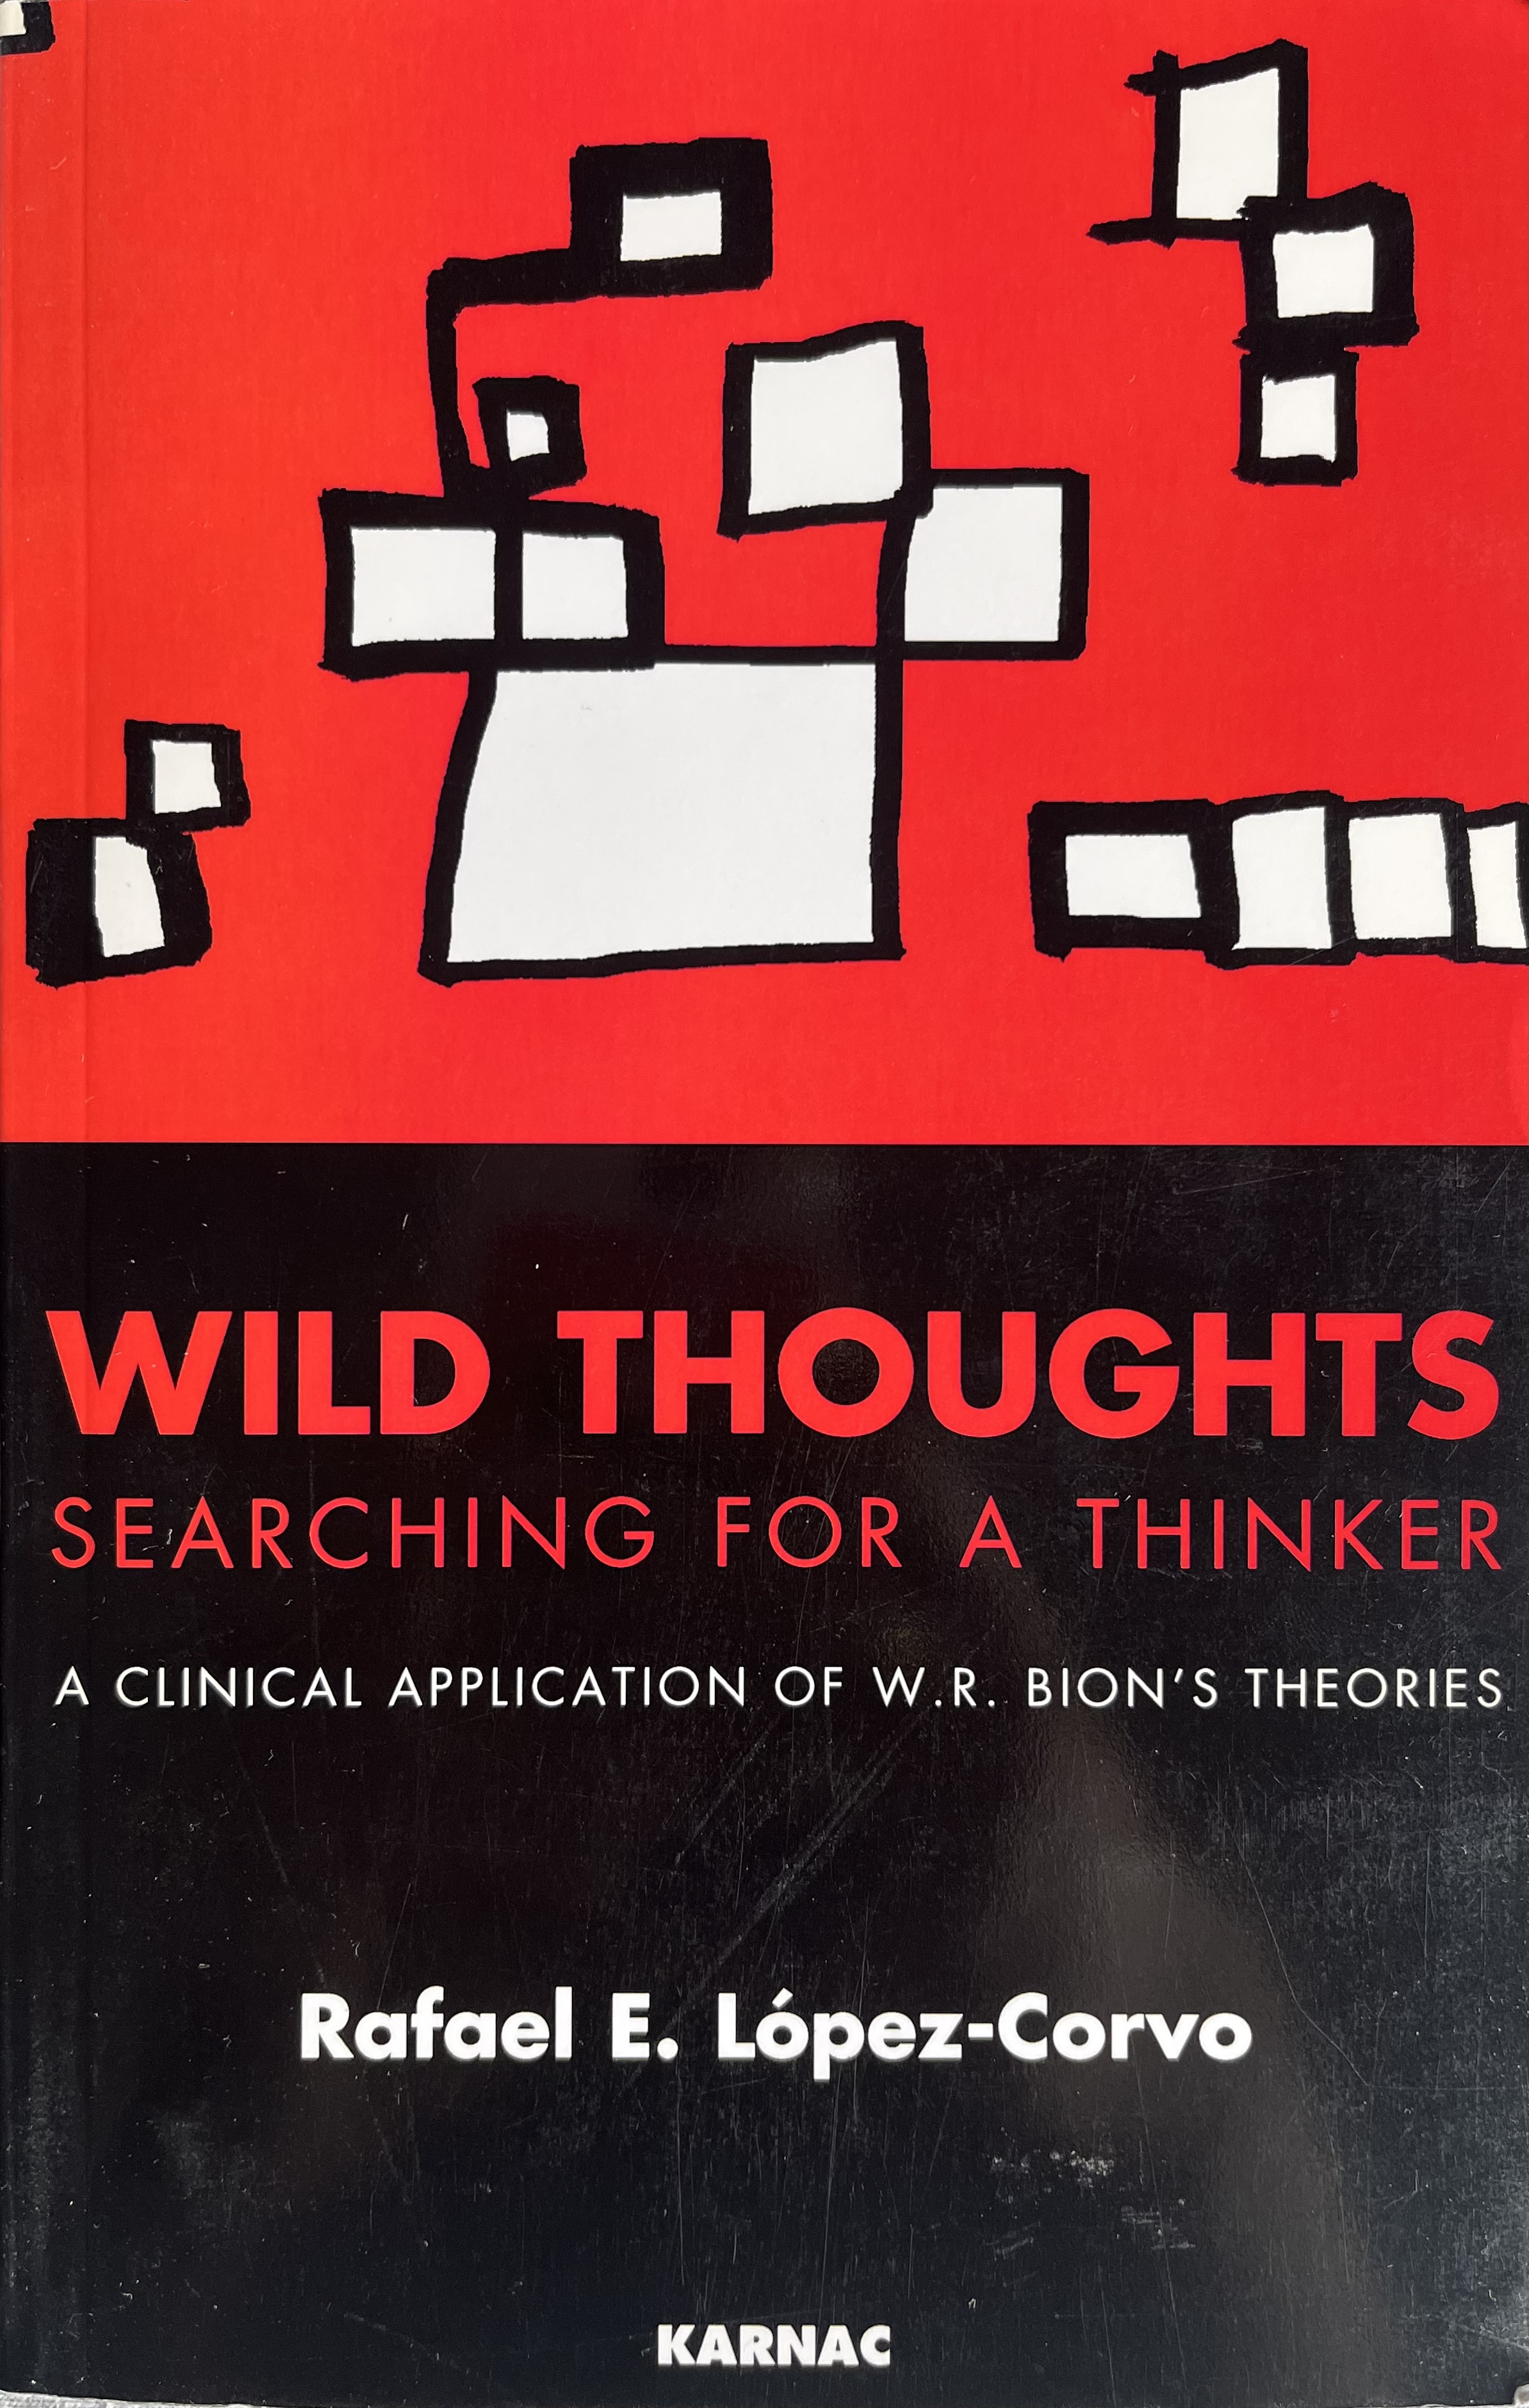 Wild Thoughts Searching for a Thinker: A Clinical Application of W. R. Bion's Theories - Rafael E. López-Corvo